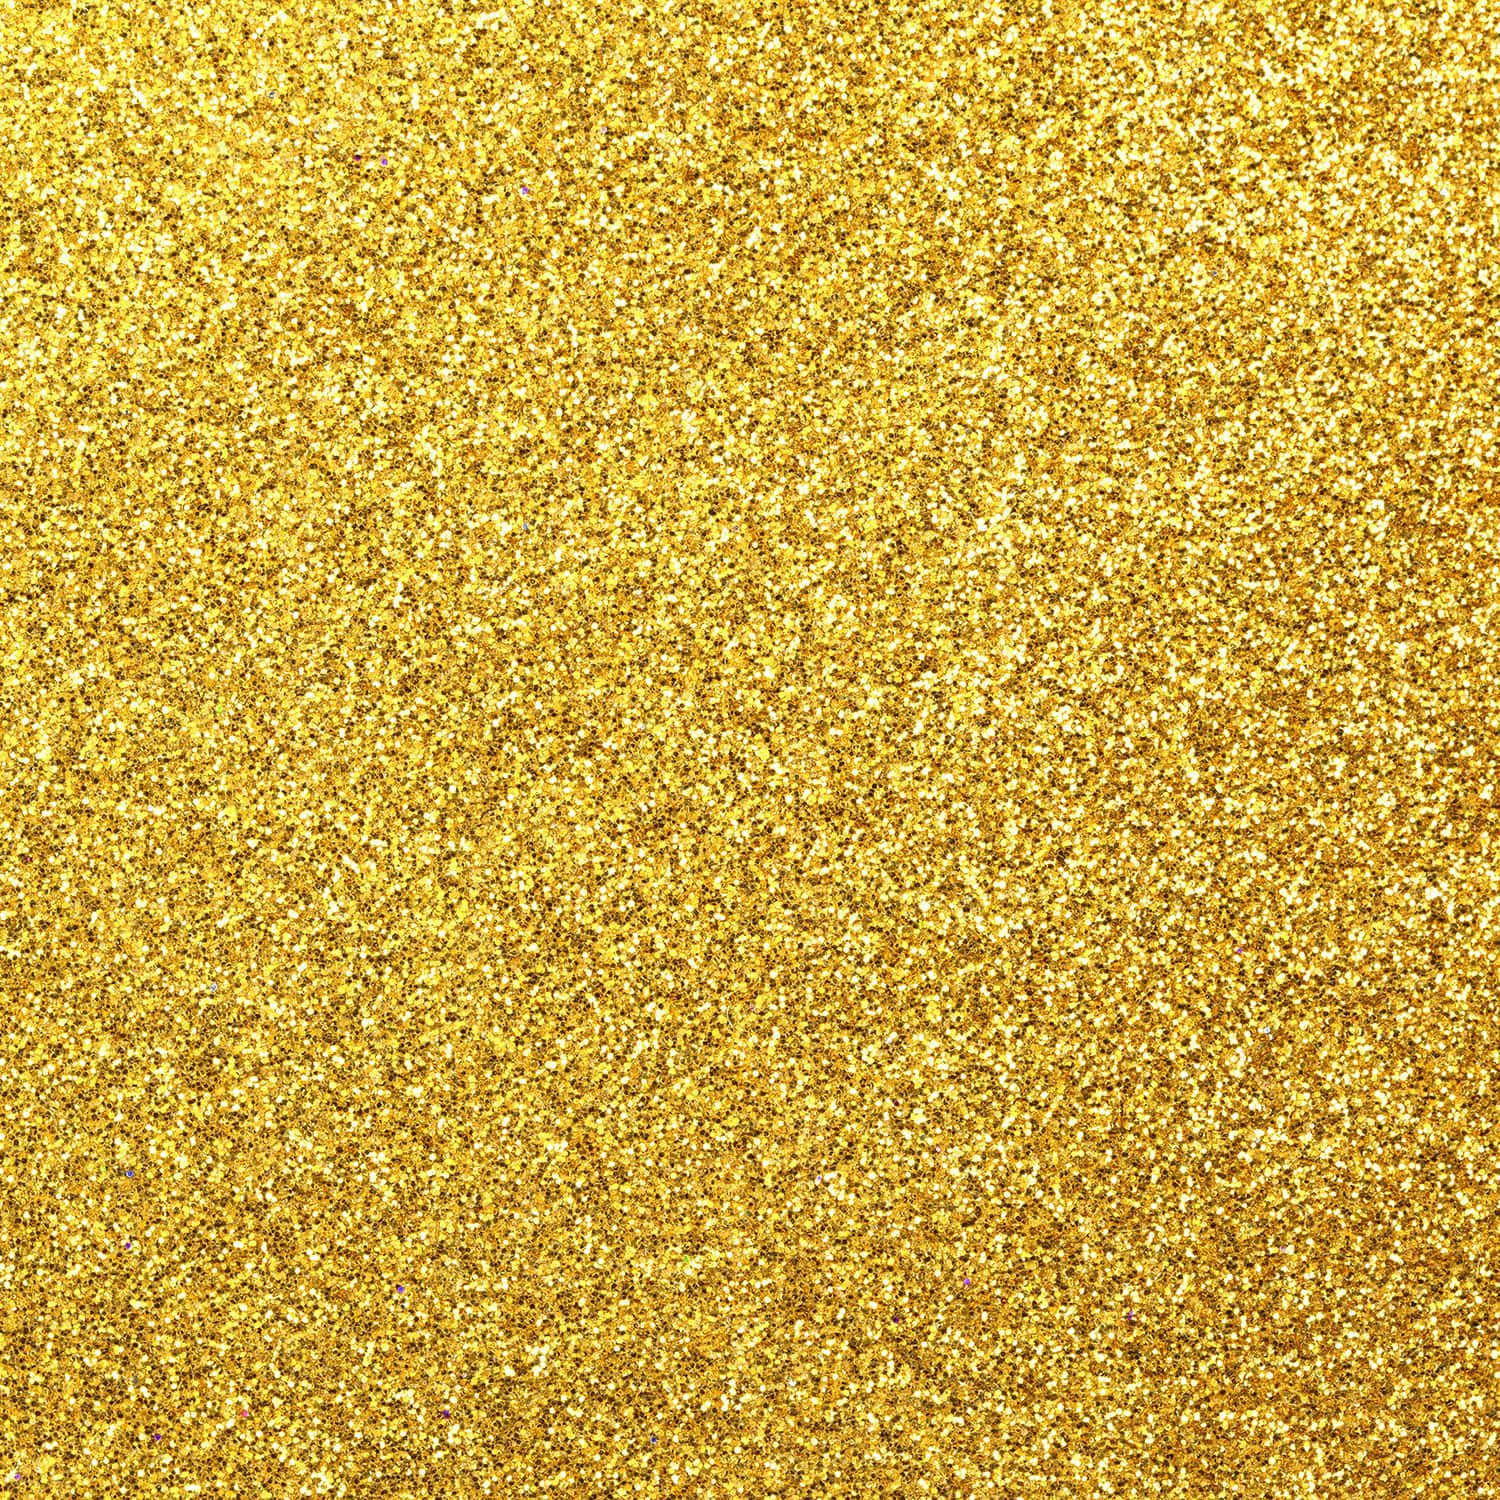 Cinder-Like Gold Glitter Picture